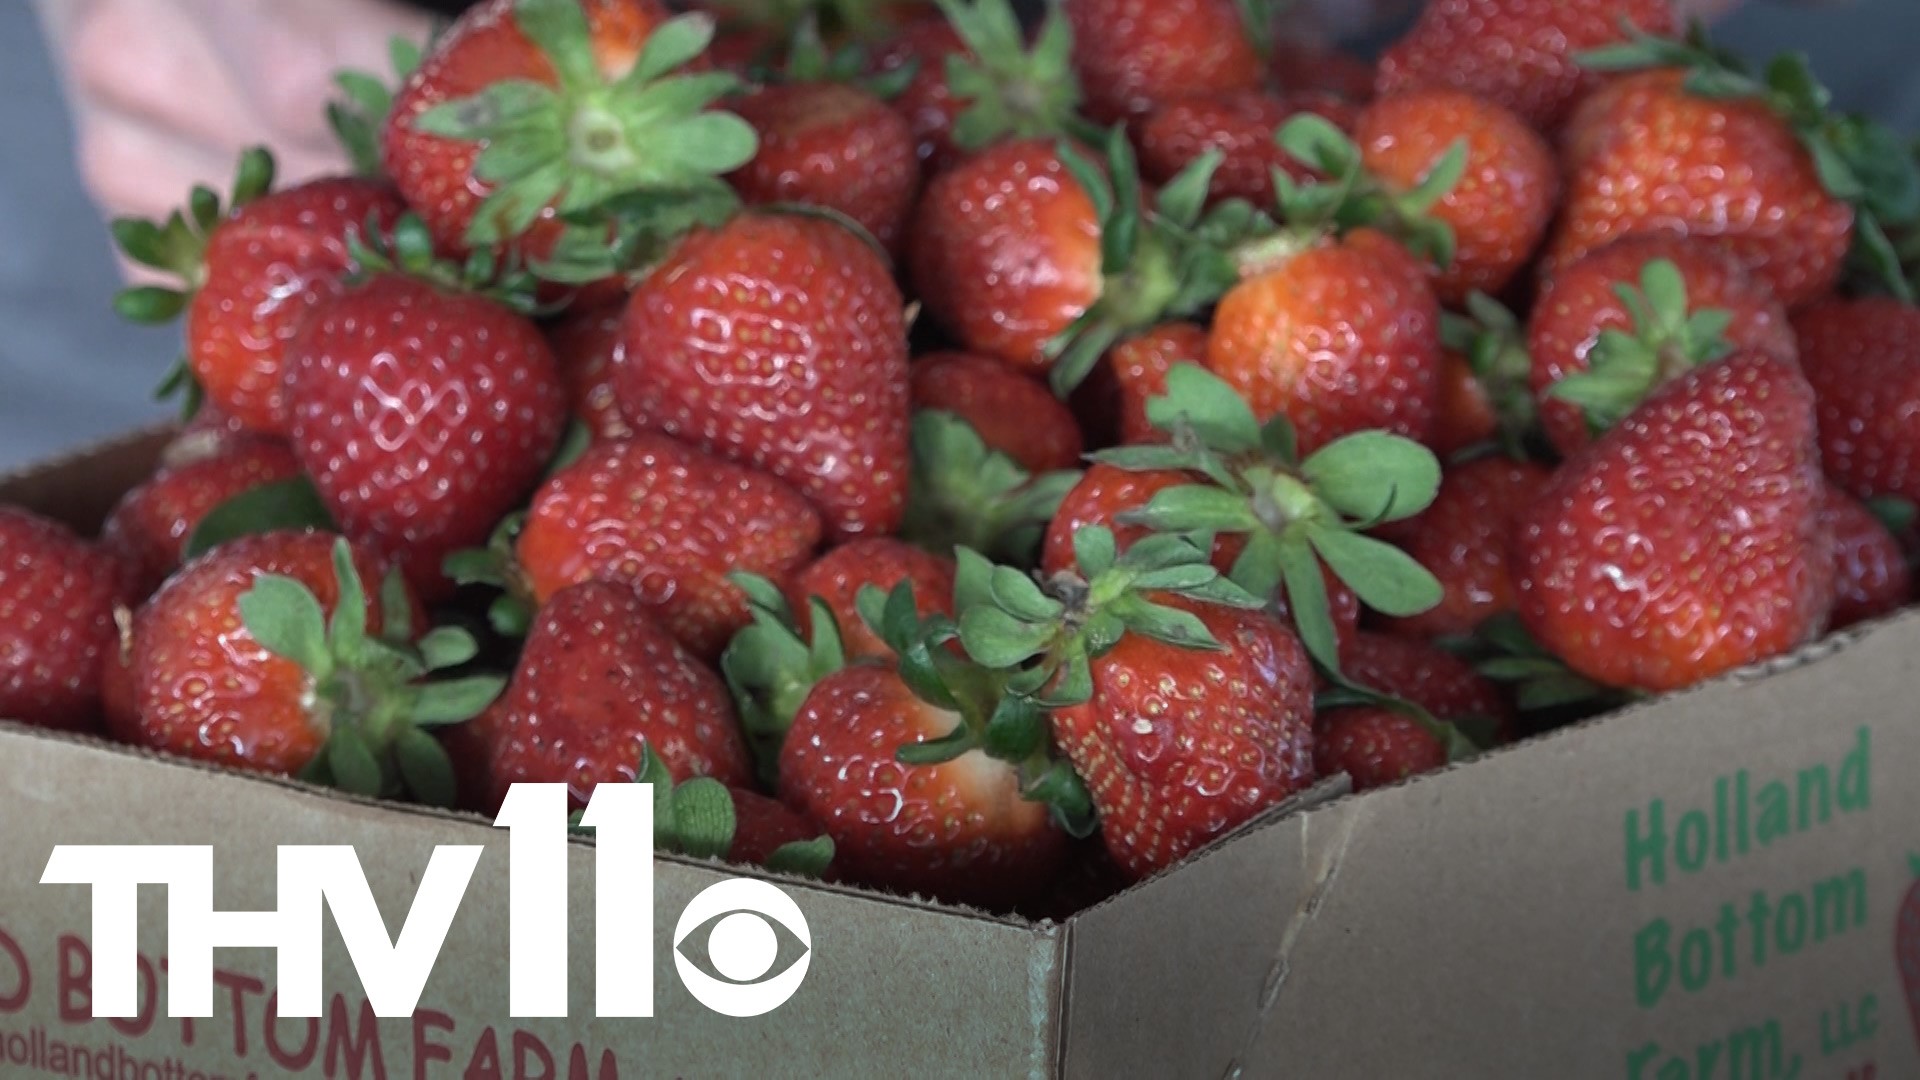 Spring berries would typically be ripe by now, but the winter weather caused a setback. For those wanting to pick some local strawberries, things are looking up.